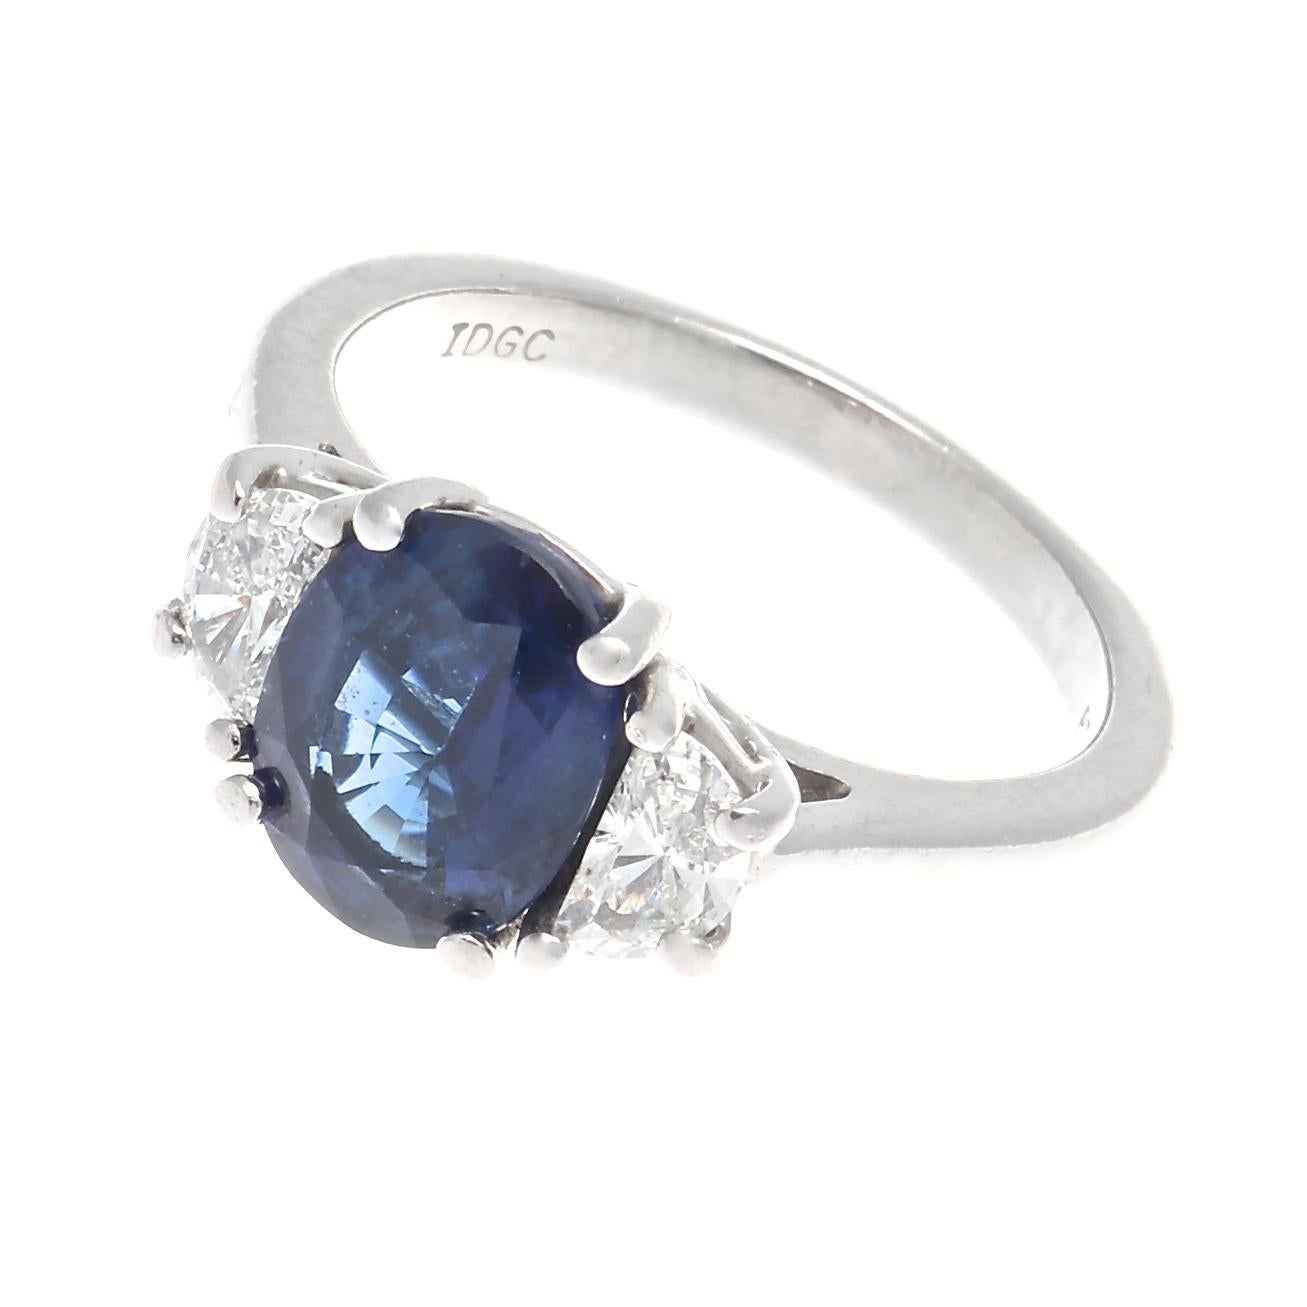 For the non-traditionalist looking for something to spice up the old tradition of the engagement ring that began centuries ago. Featuring a 2.46 carat navy blue sapphire that is GIA certified as Ceylon origin with indications of heat treatment. A